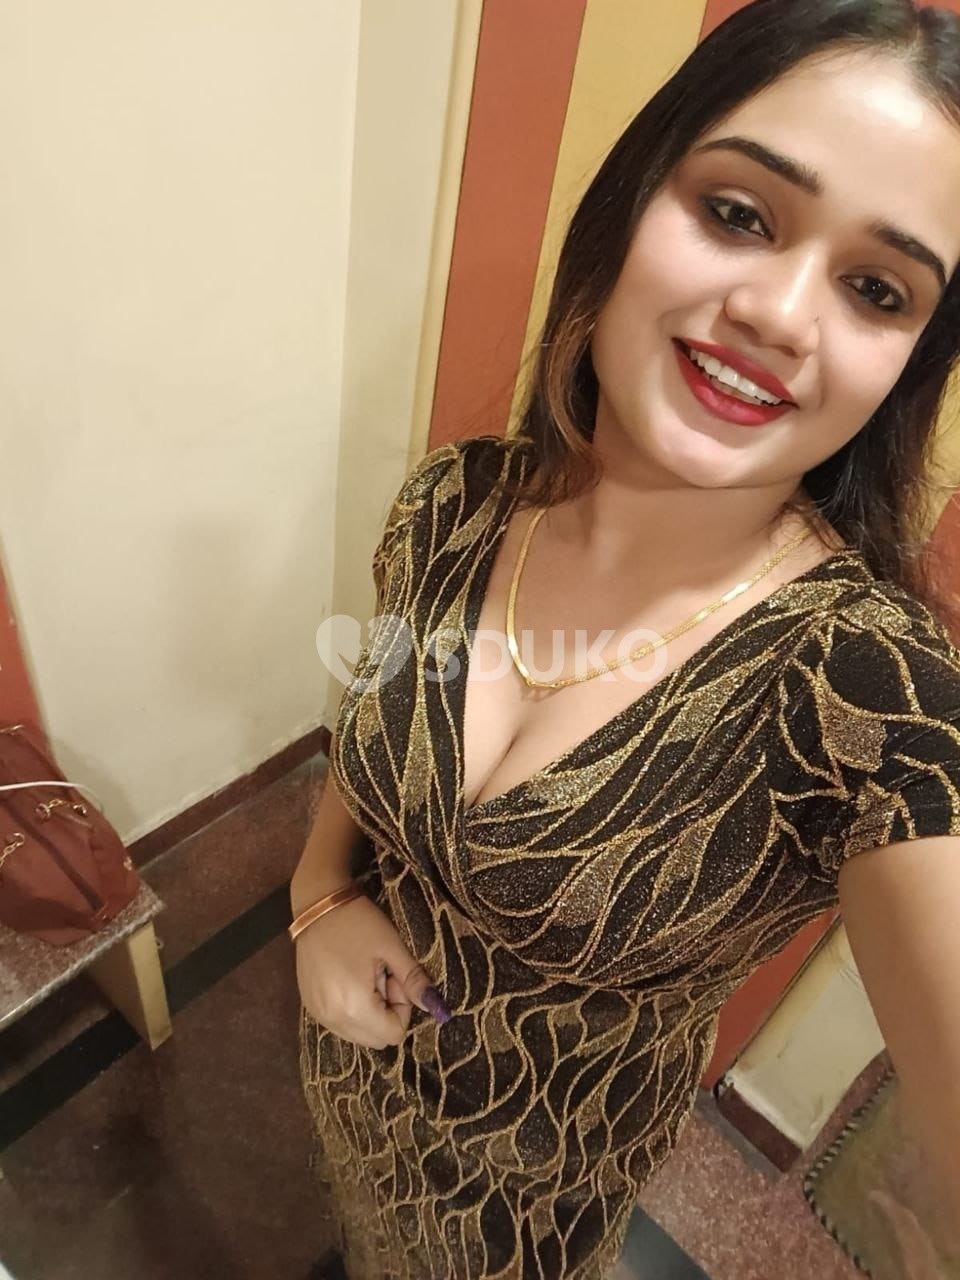 SWARGATE ♥️(PUNE)..MYSELF SWETA CALL GIRL & BODY-2-BODY MASSAGE SPA SERVICES OUTCALL OUTCALL INCALL 24 HOURS...